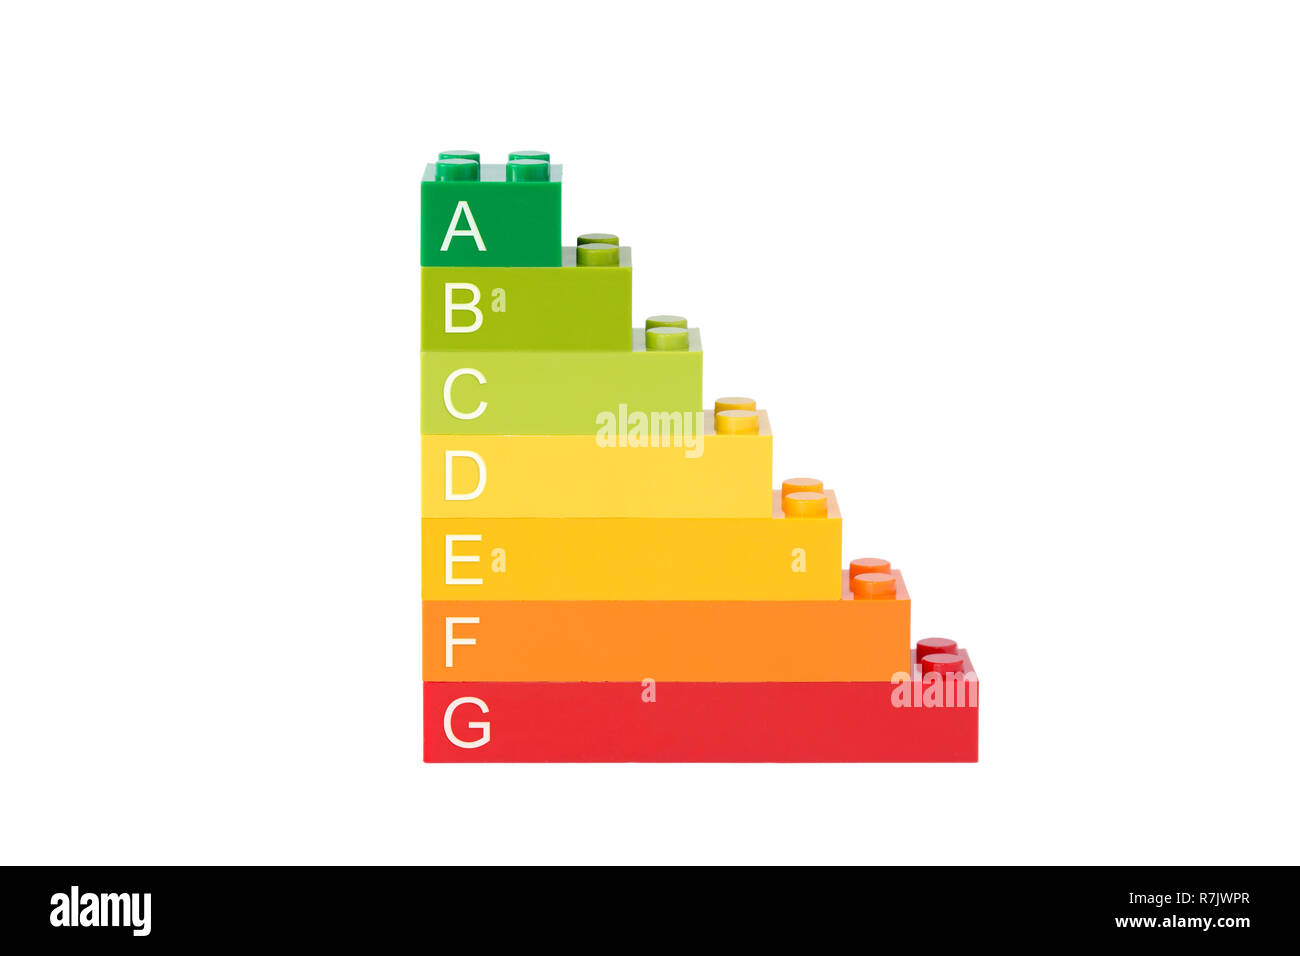 European Union energy efficiency label with classes from A to G, made of toy building bricks, viewed from the front. Isolated on white background. Stock Photo